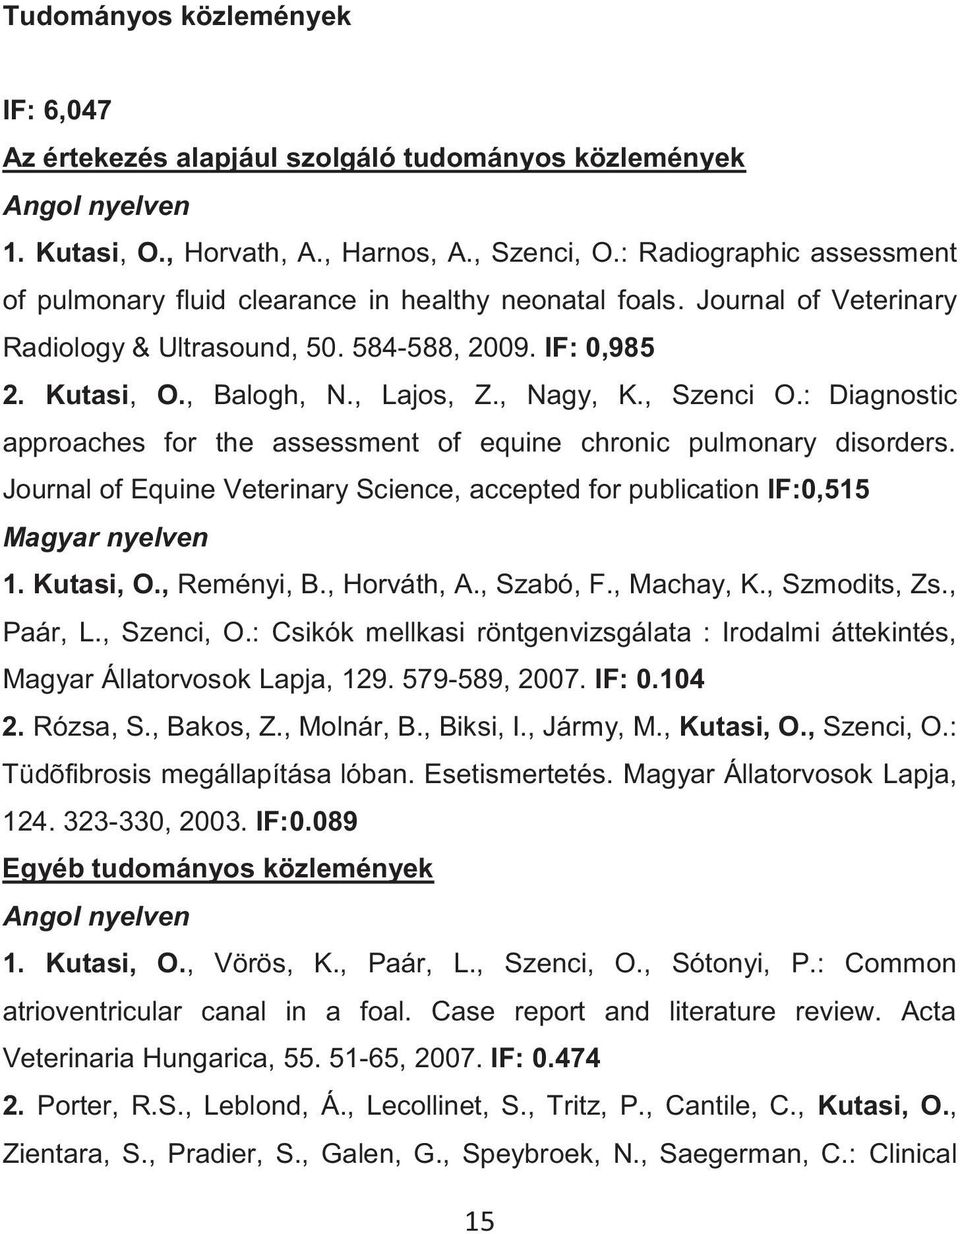 , Nagy, K., Szenci O.: Diagnostic approaches for the assessment of equine chronic pulmonary disorders. Journal of Equine Veterinary Science, accepted for publication IF:0,515 Magyar nyelven 1.